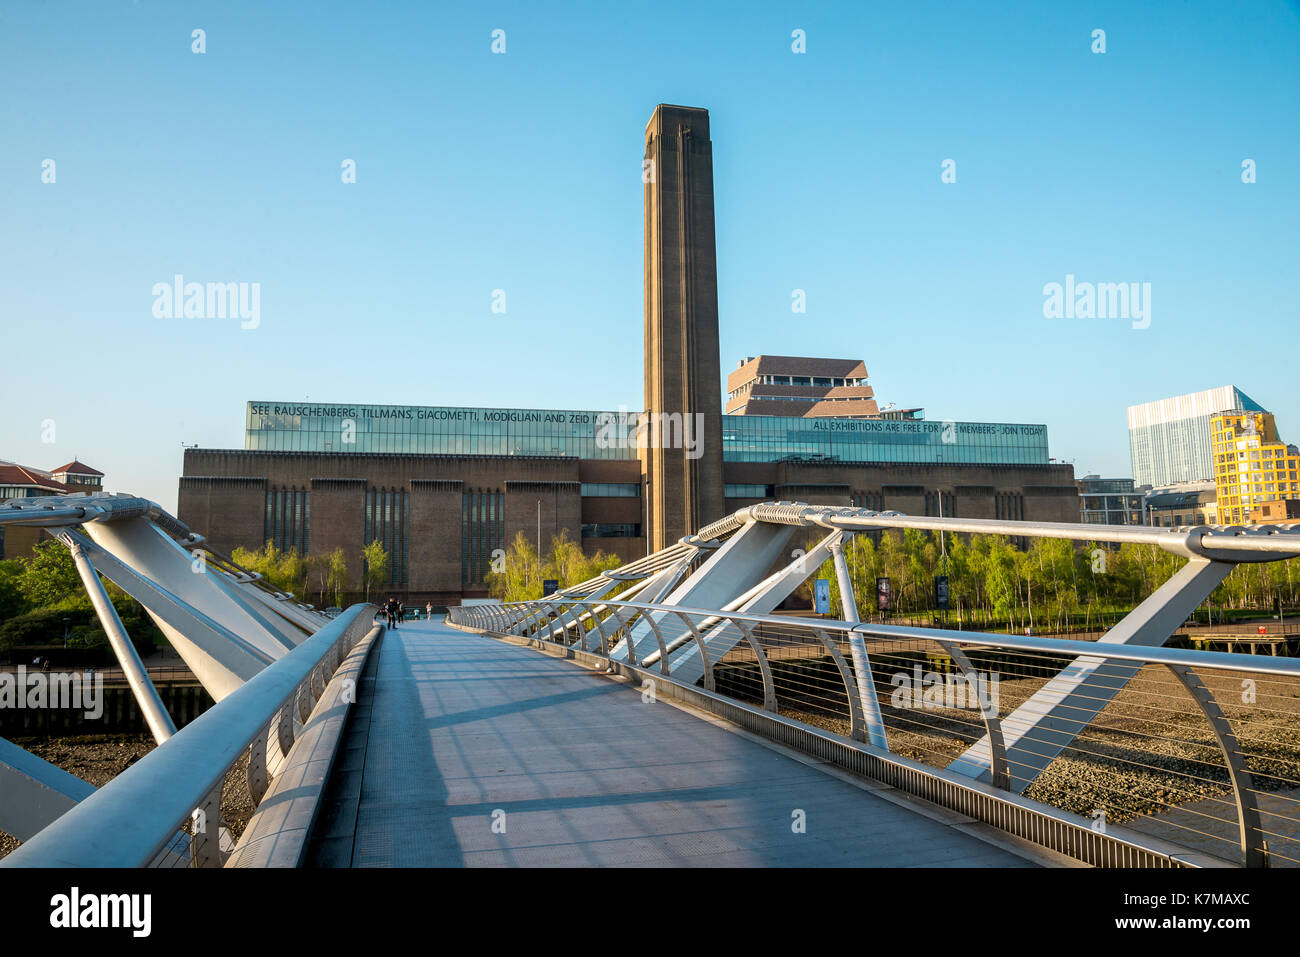 Tate Modern Exhibition centre on South Bank of Thames river, view from Millennium Bridge Stock Photo